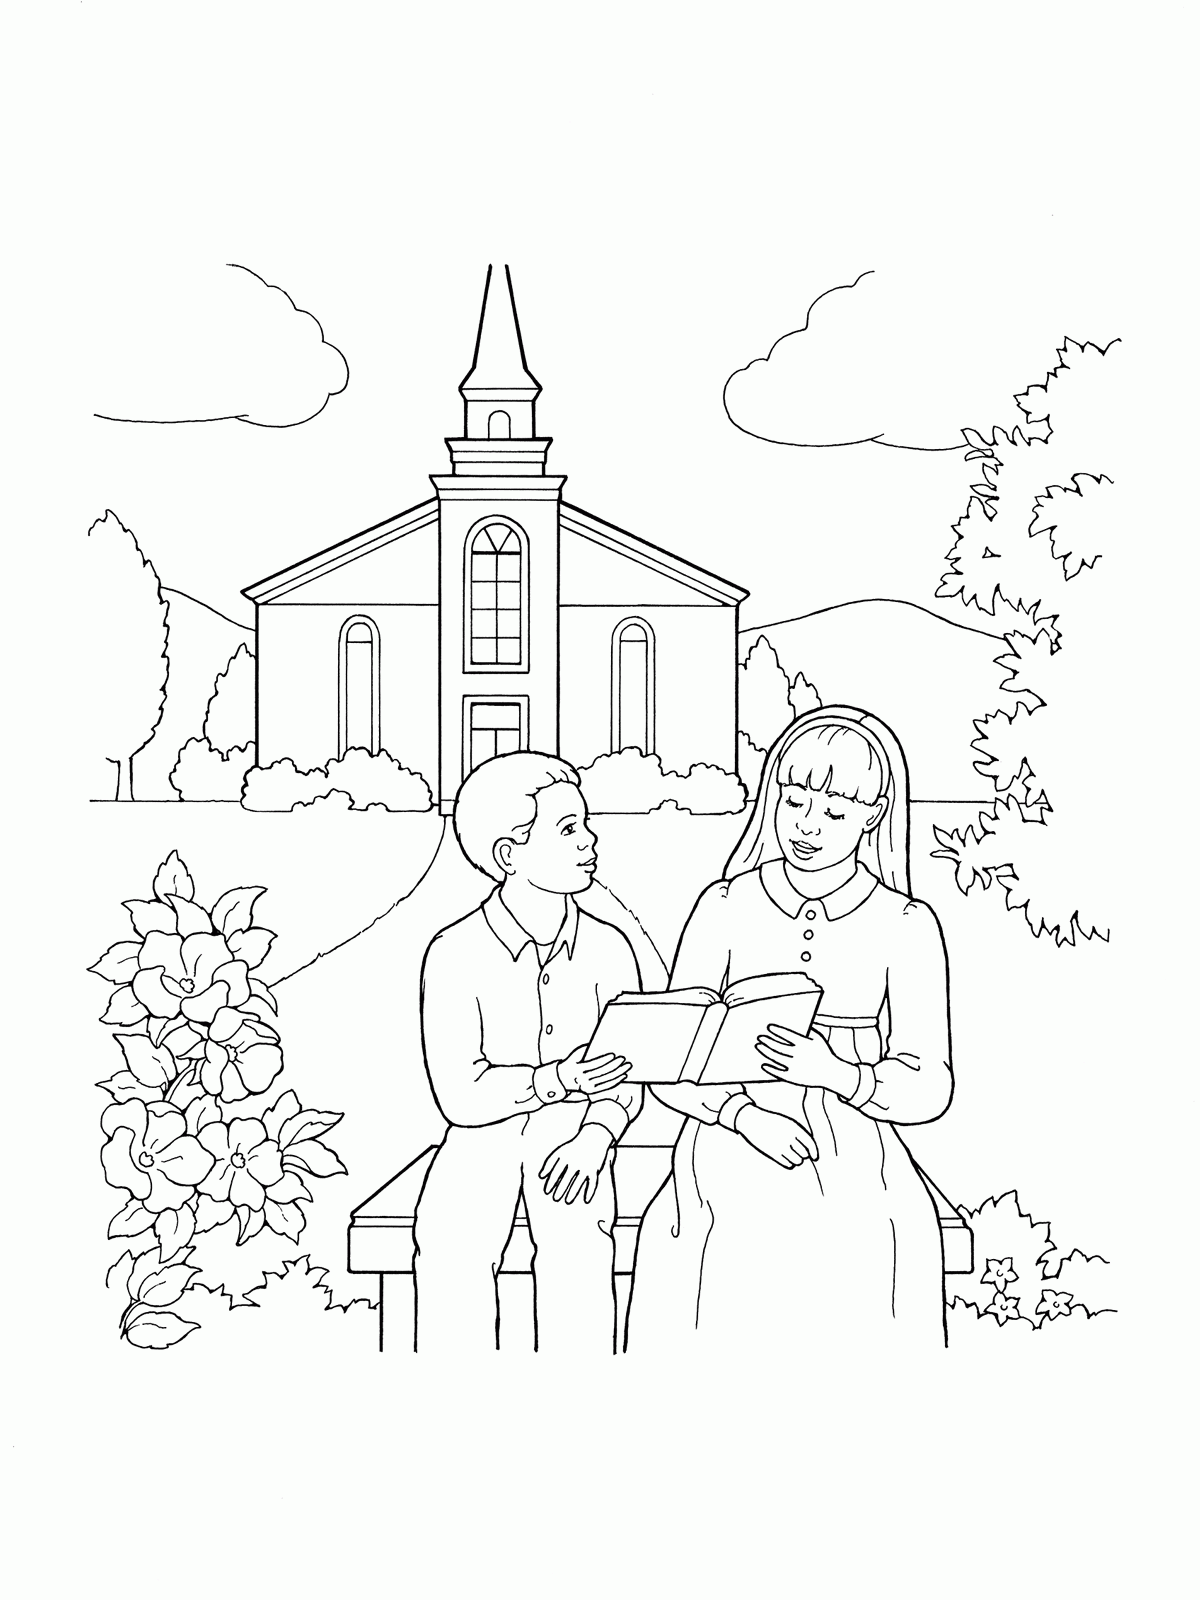 Coloring Pages Of Families Going To Church   Coloring Home